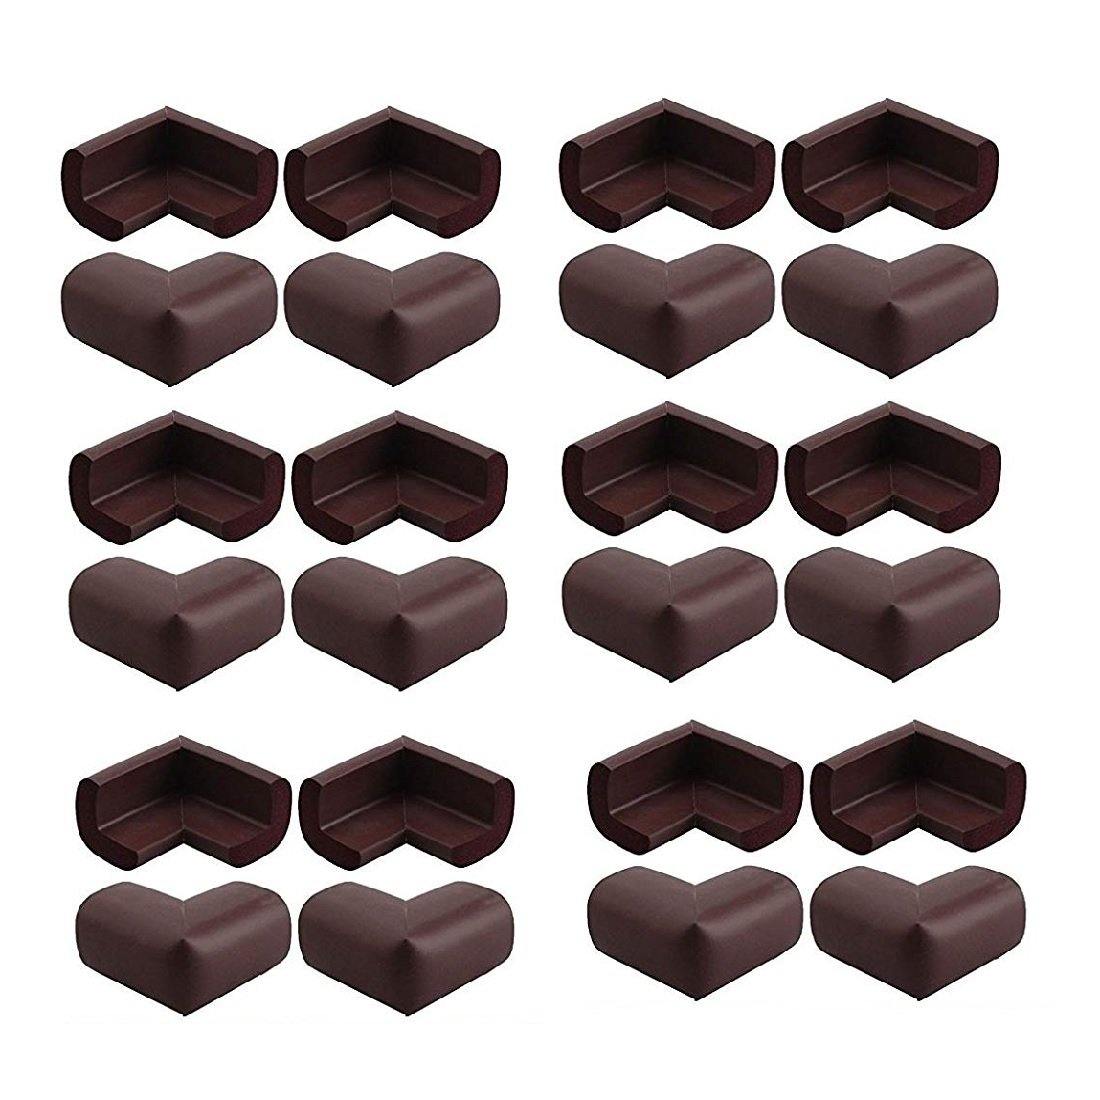 https://royalkart.in/cdn/shop/products/baby-proofing-l-shaped-corner-guards-edge-protectors-with-special-adhesive-tapeedge-corner-guardsroyalkart-the-urban-store-660331.jpg?v=1678453359&width=1445